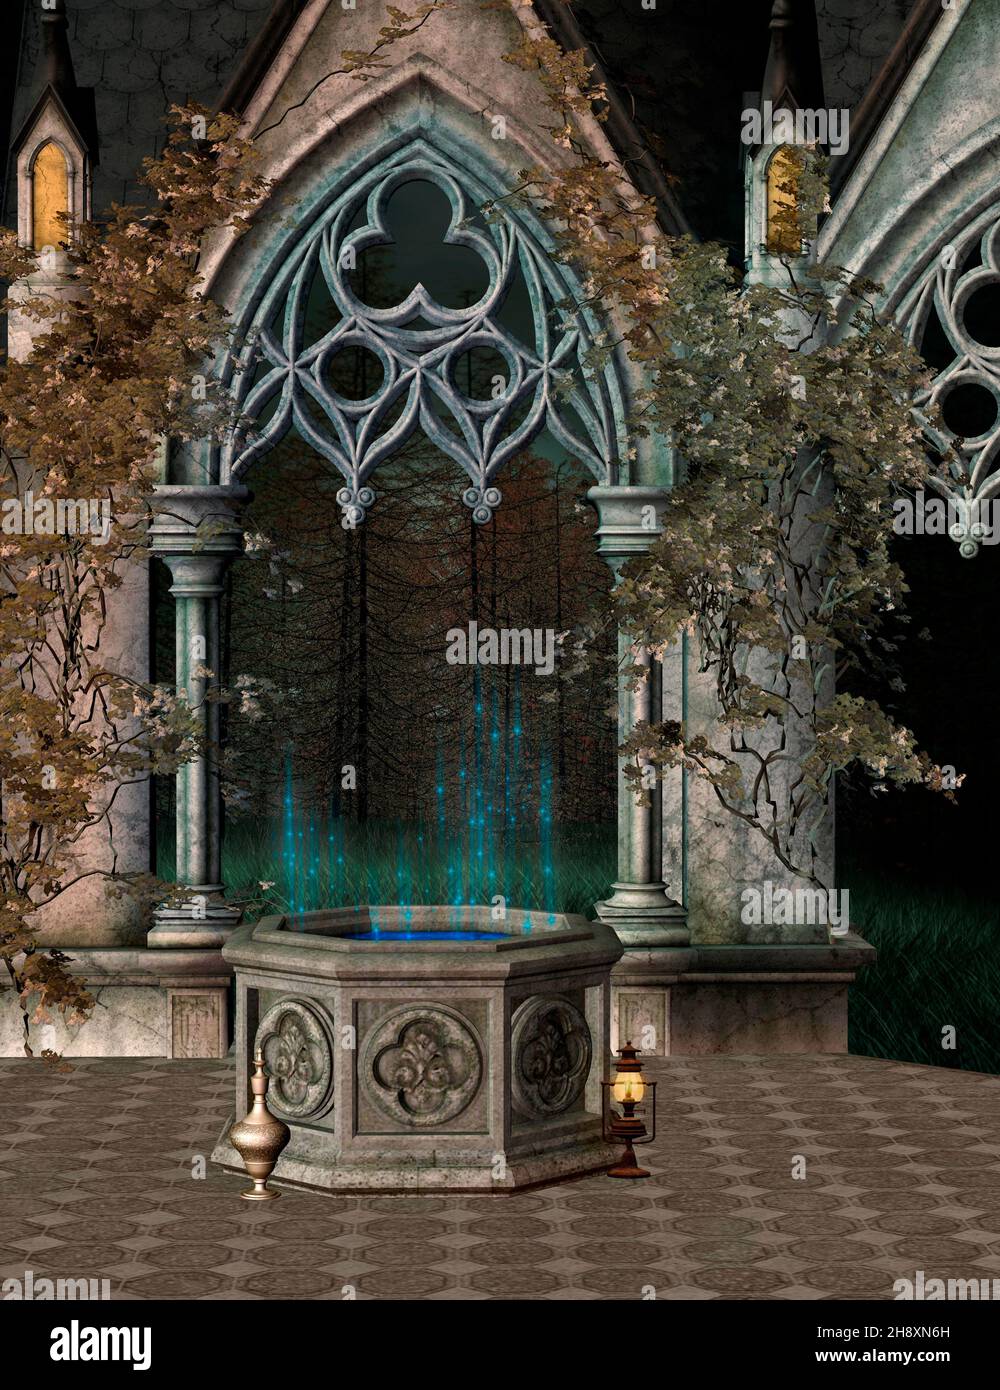 The wishing well with a gothic doorway Stock Photo